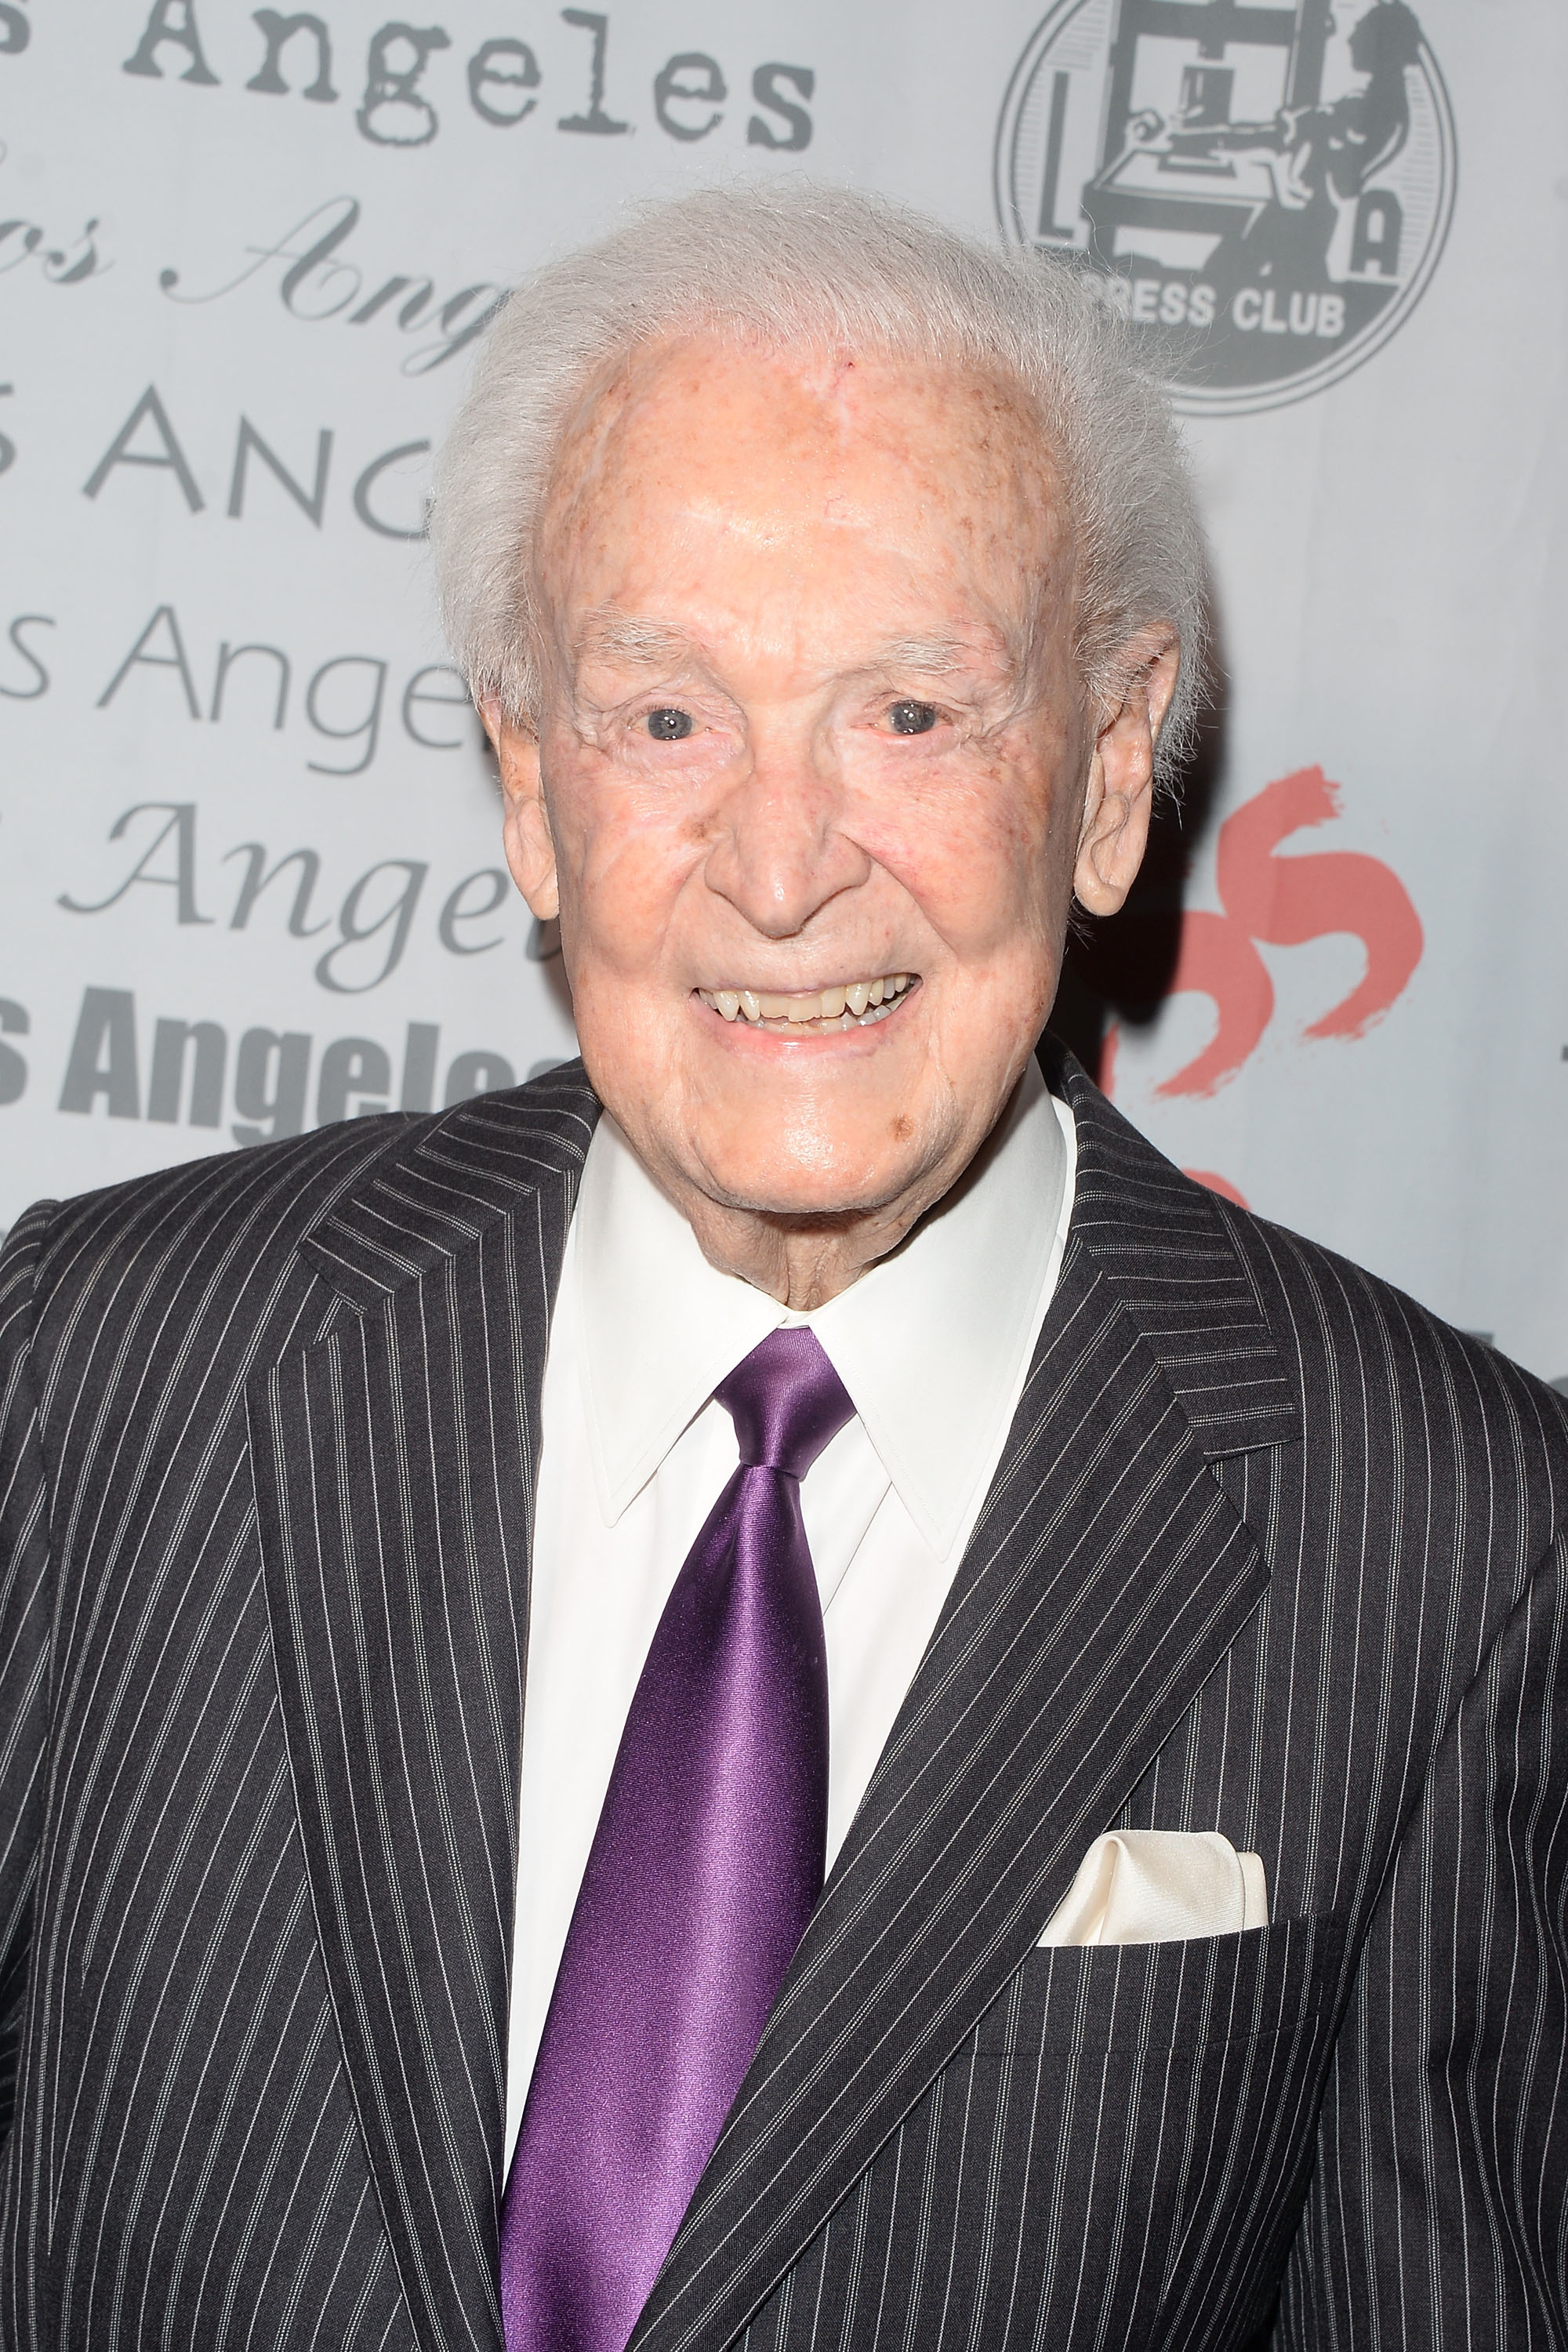 Bob Barker arrives at the National Arts and Entertainment Journalism Awards Gala at Millennium Biltmore Hotel on December 6, 2015, in Los Angeles, California. | Source: Getty Images